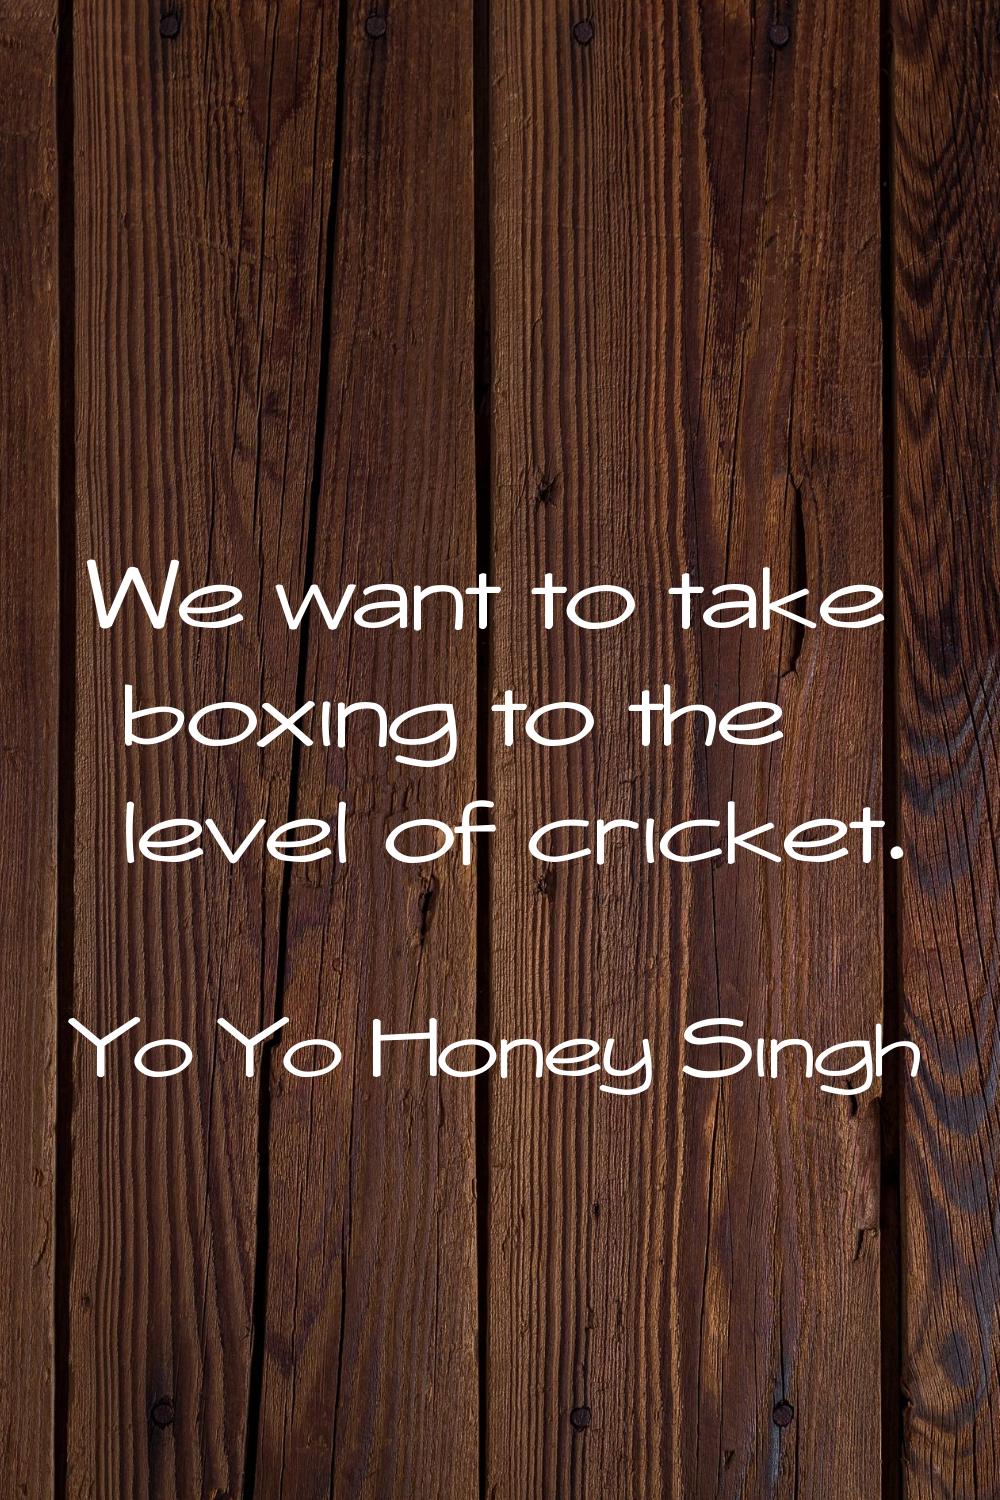 We want to take boxing to the level of cricket.